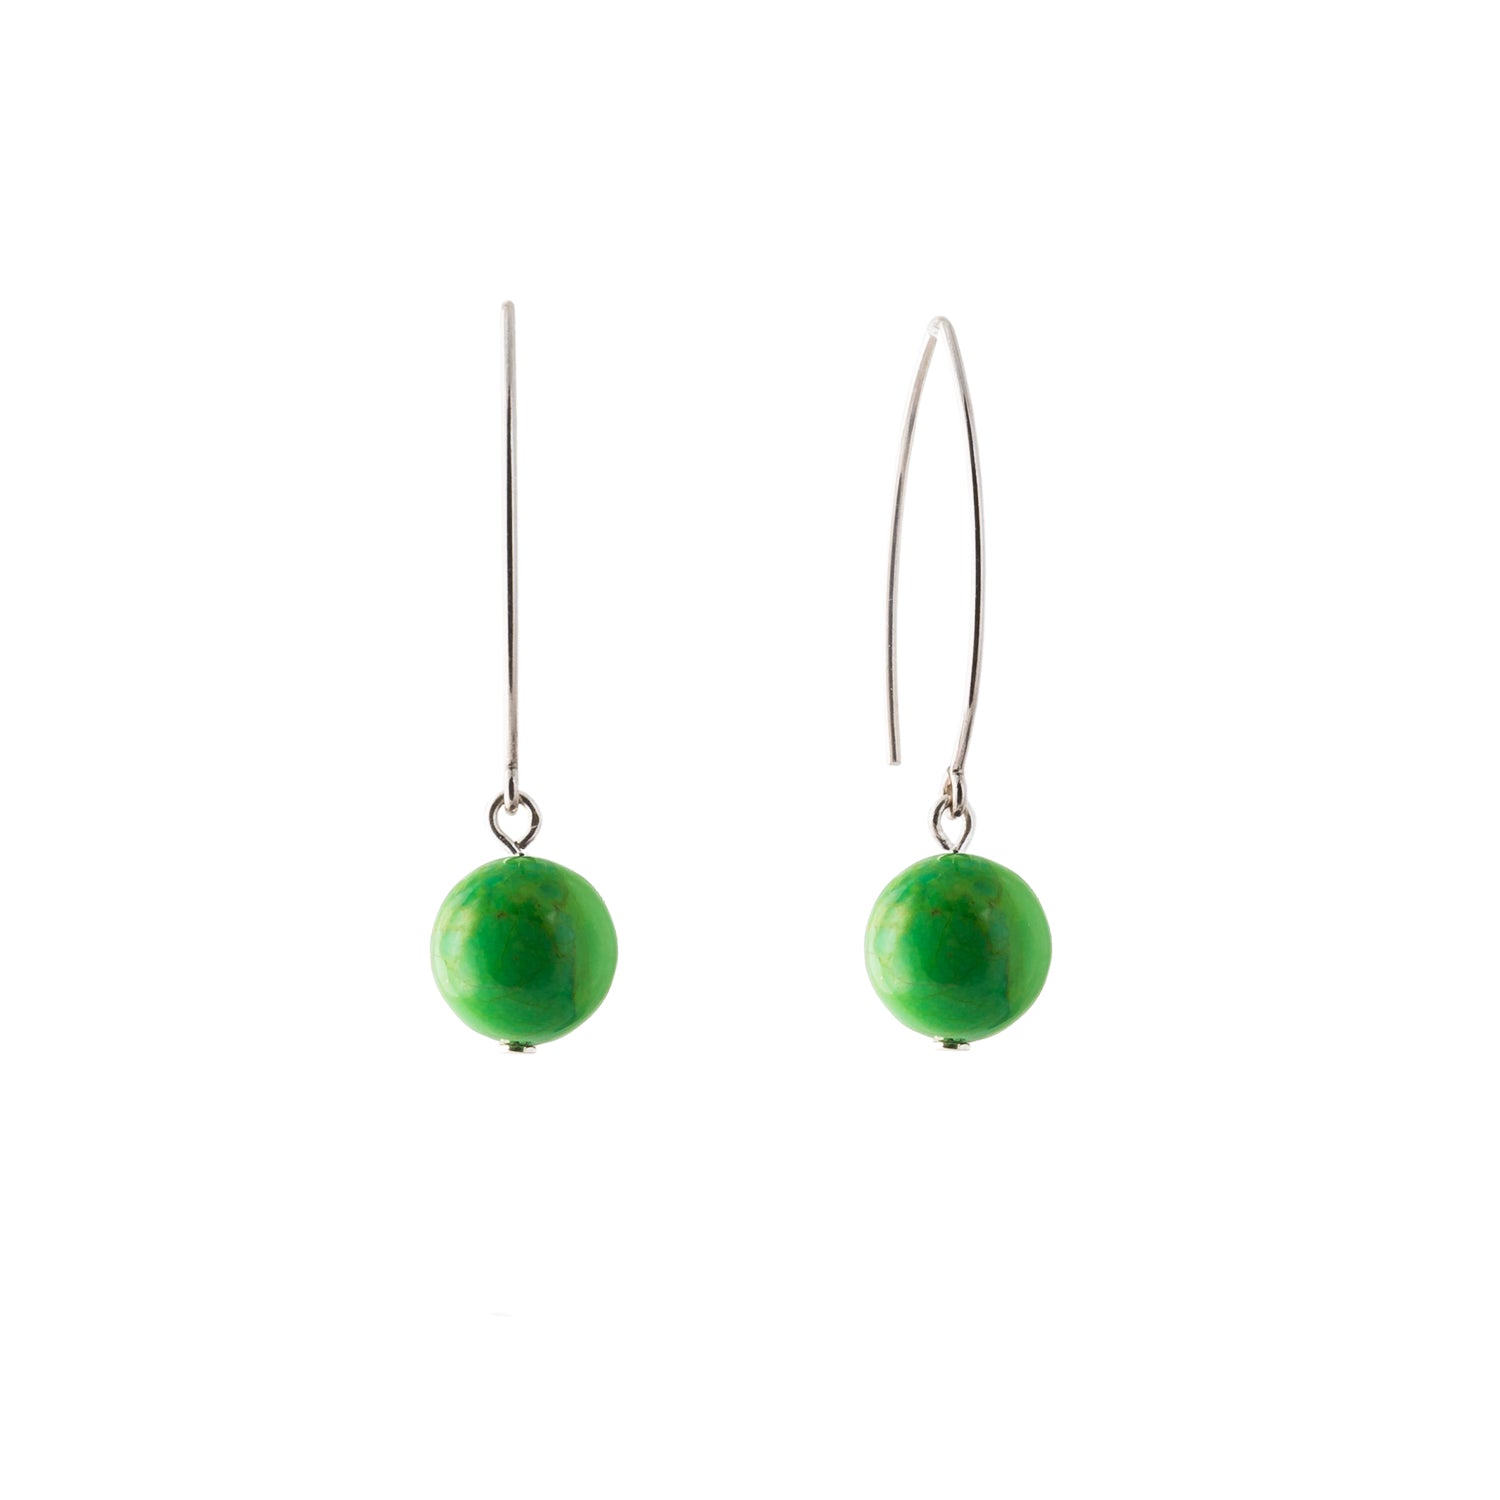 Discover more than 143 green earrings uk best